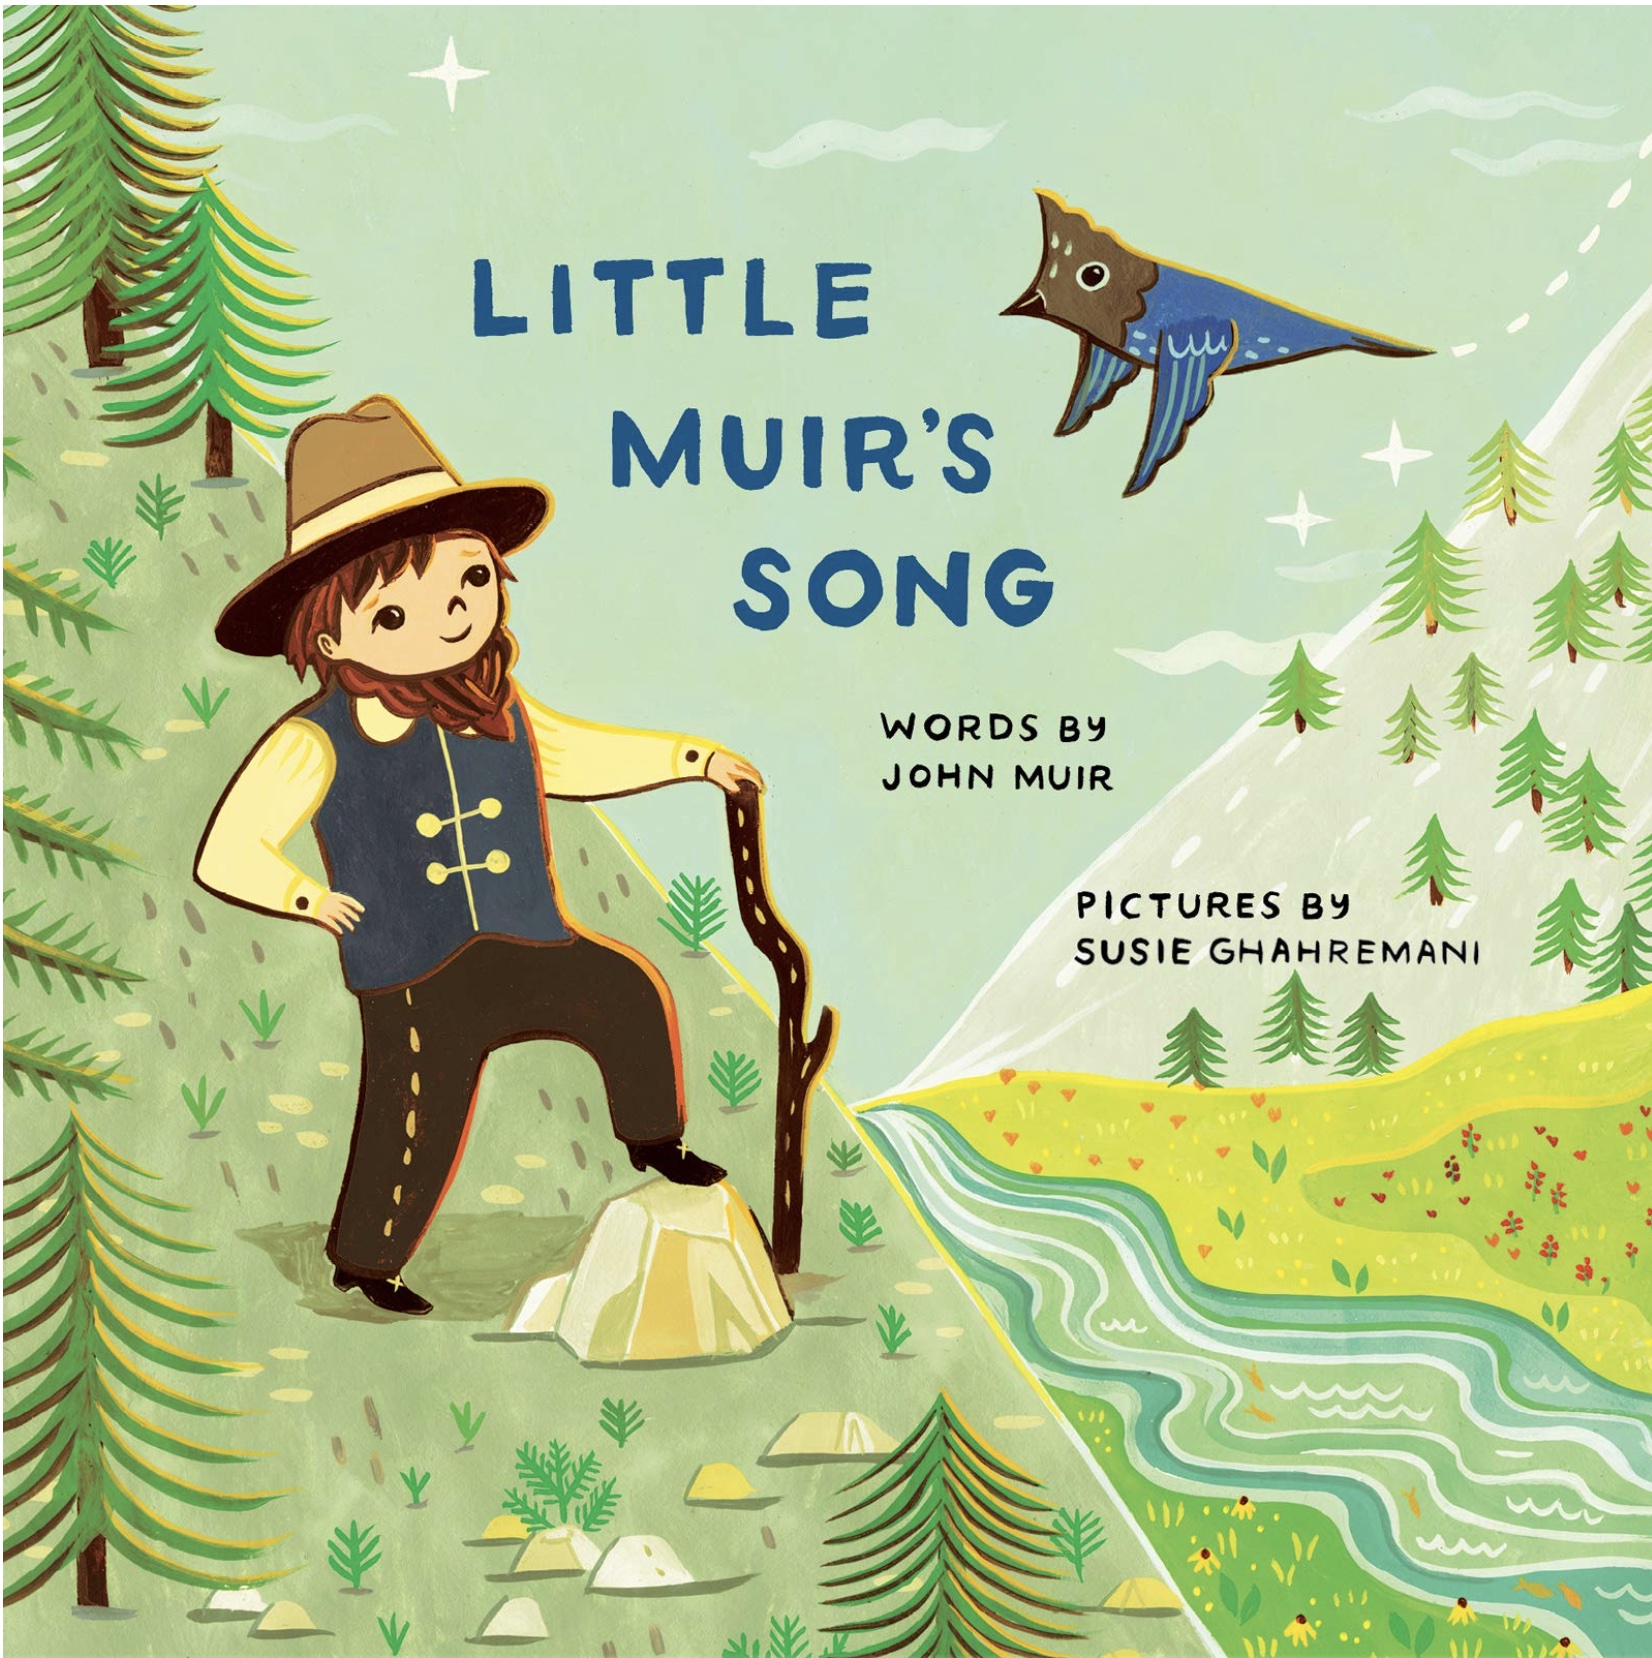 Little Muir's Song - Words by John Muir, Pictures by Susie Ghahremani - book cover